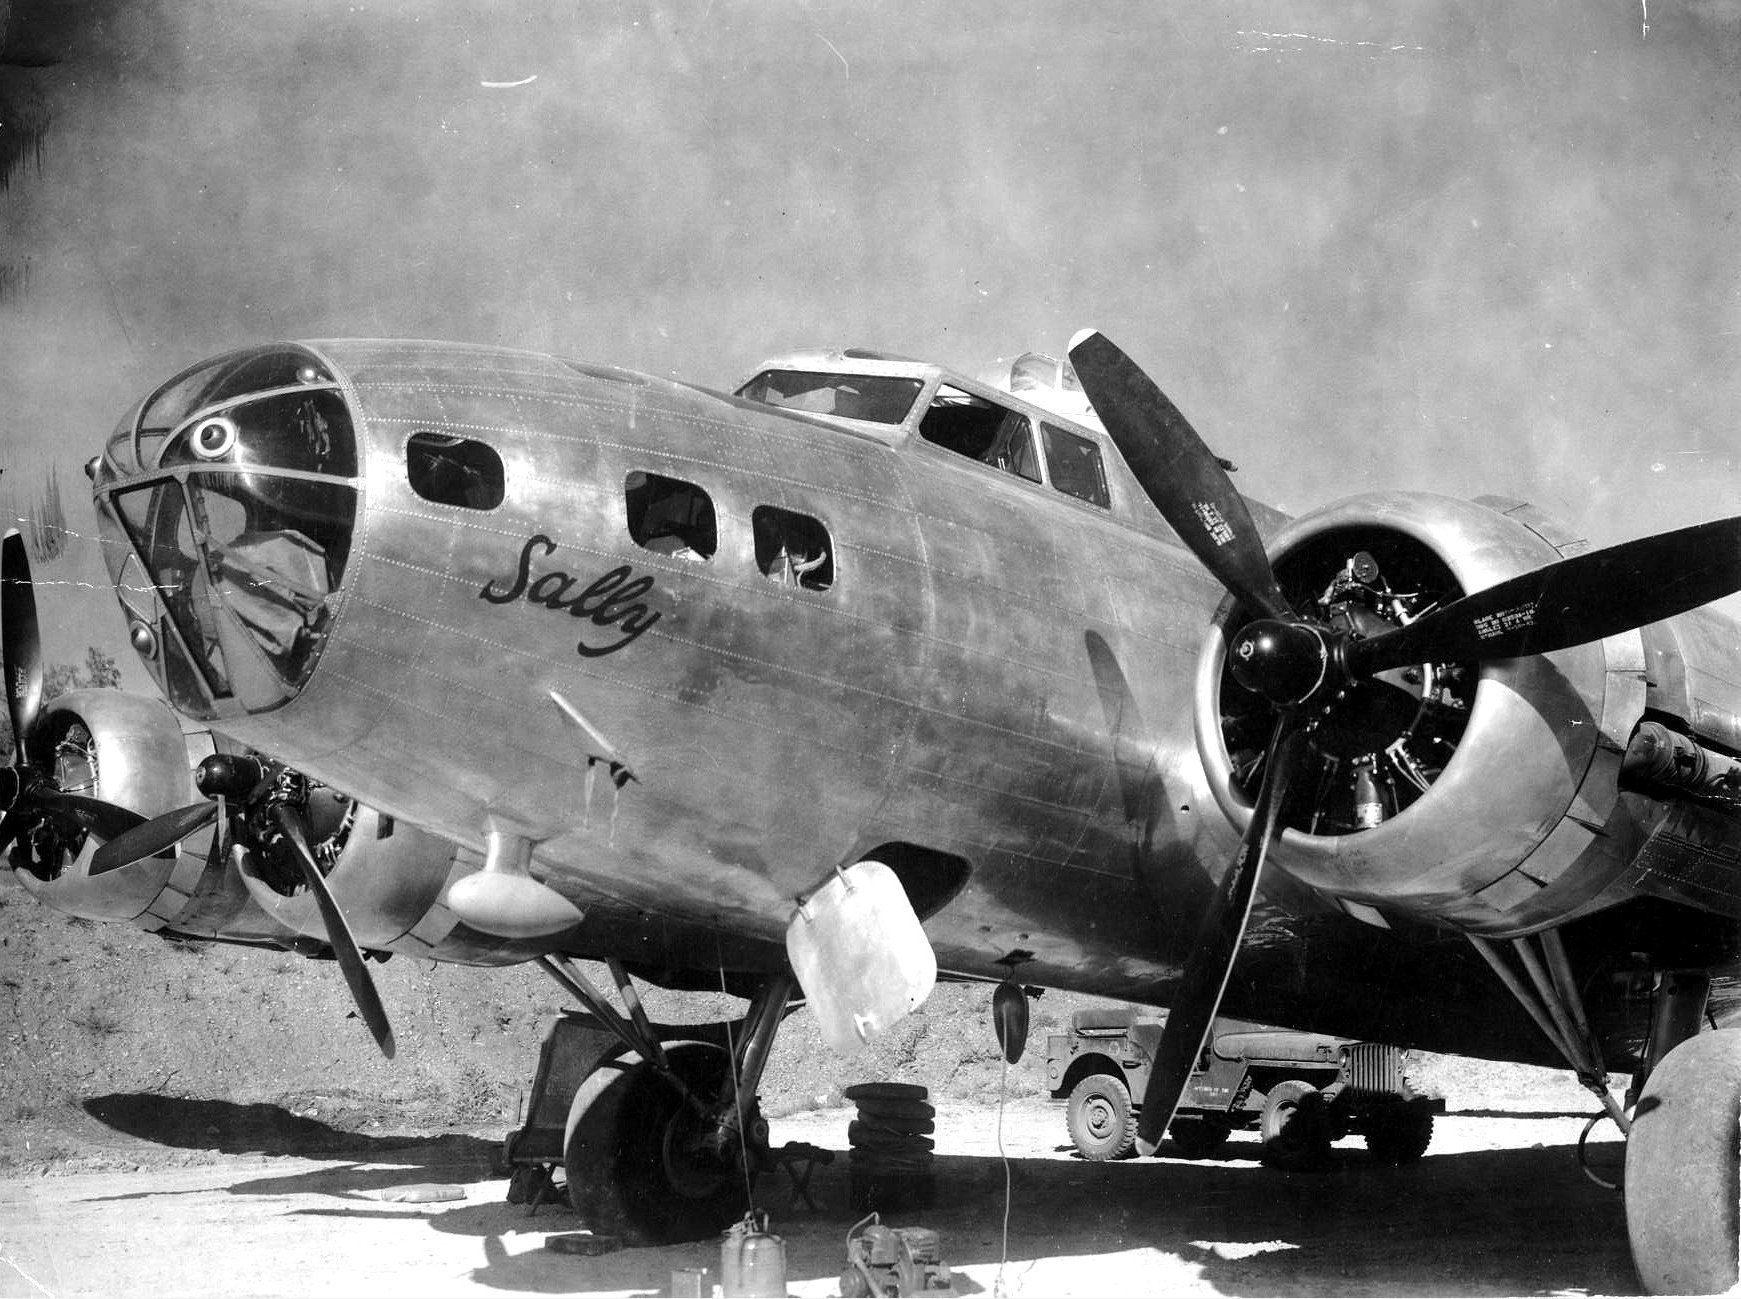 B-17E 'Sally' of US 5th Air Force based between Townsville, Queensland, Australia and Port Moresby, New Guinea; this aircraft was used exclusively to transport Major General George Kenney; note Jeep